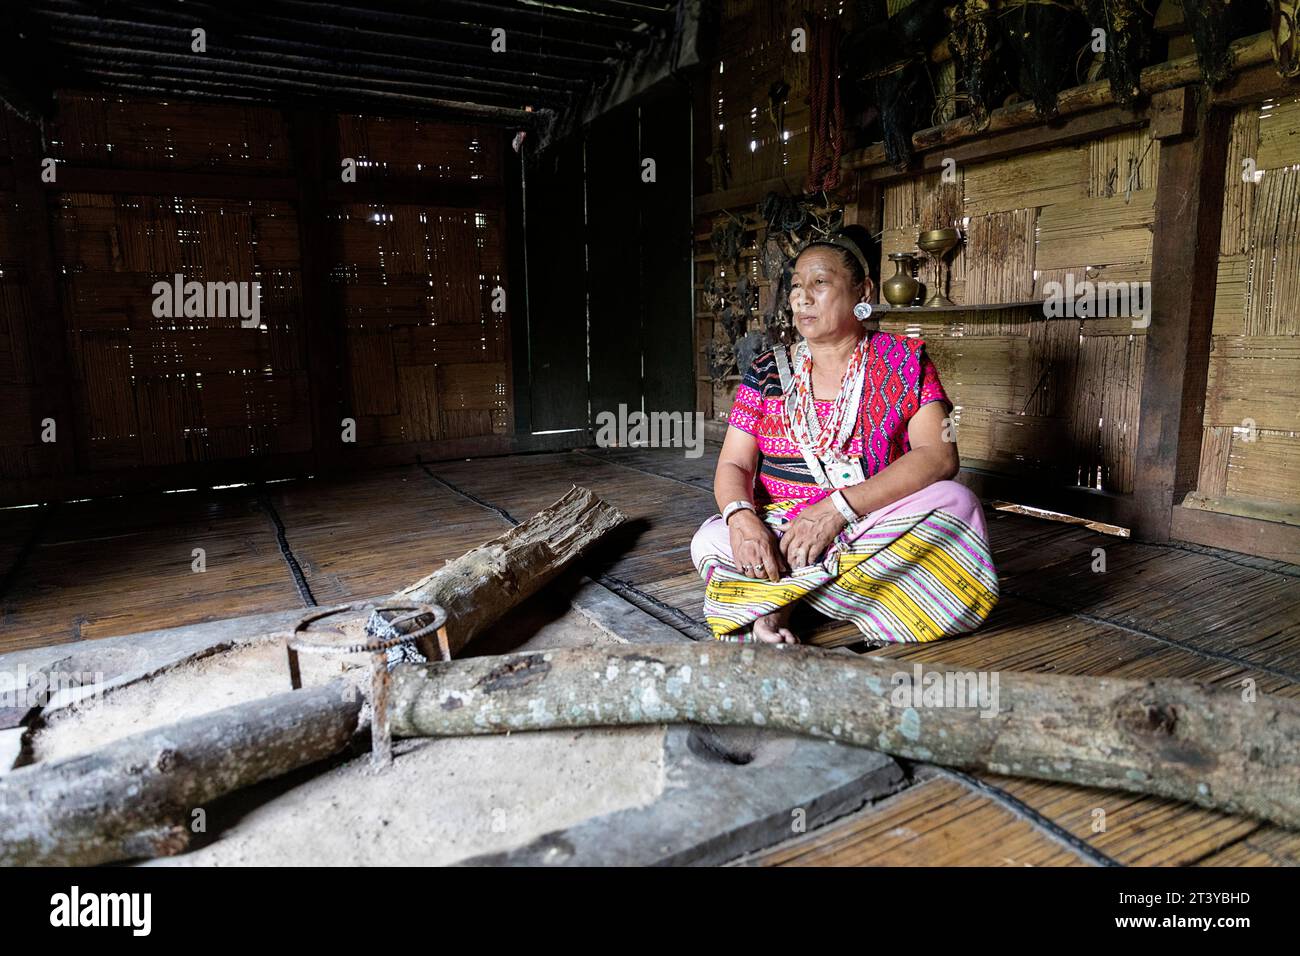 Woman from Adi tribe in traditional clothes sitting by the fireplace in traditional wooden house in Assam, Northeast India Stock Photo